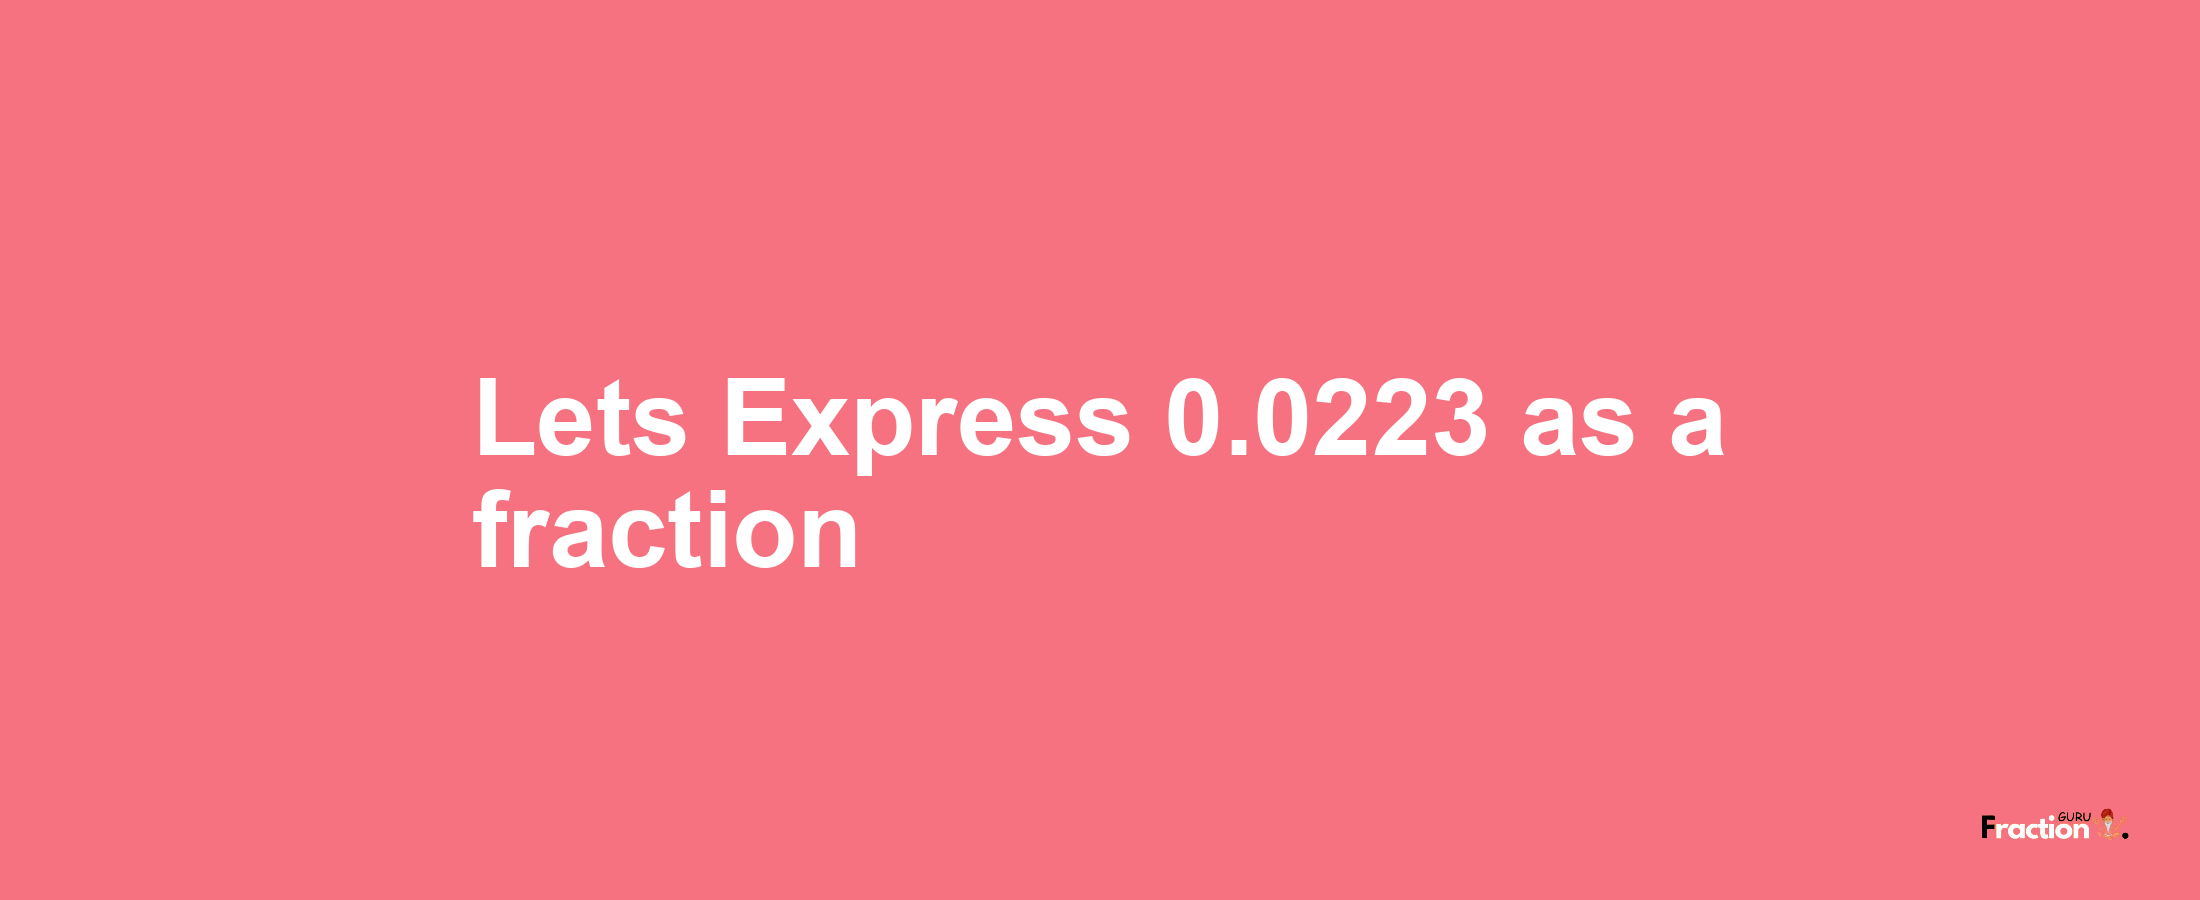 Lets Express 0.0223 as afraction